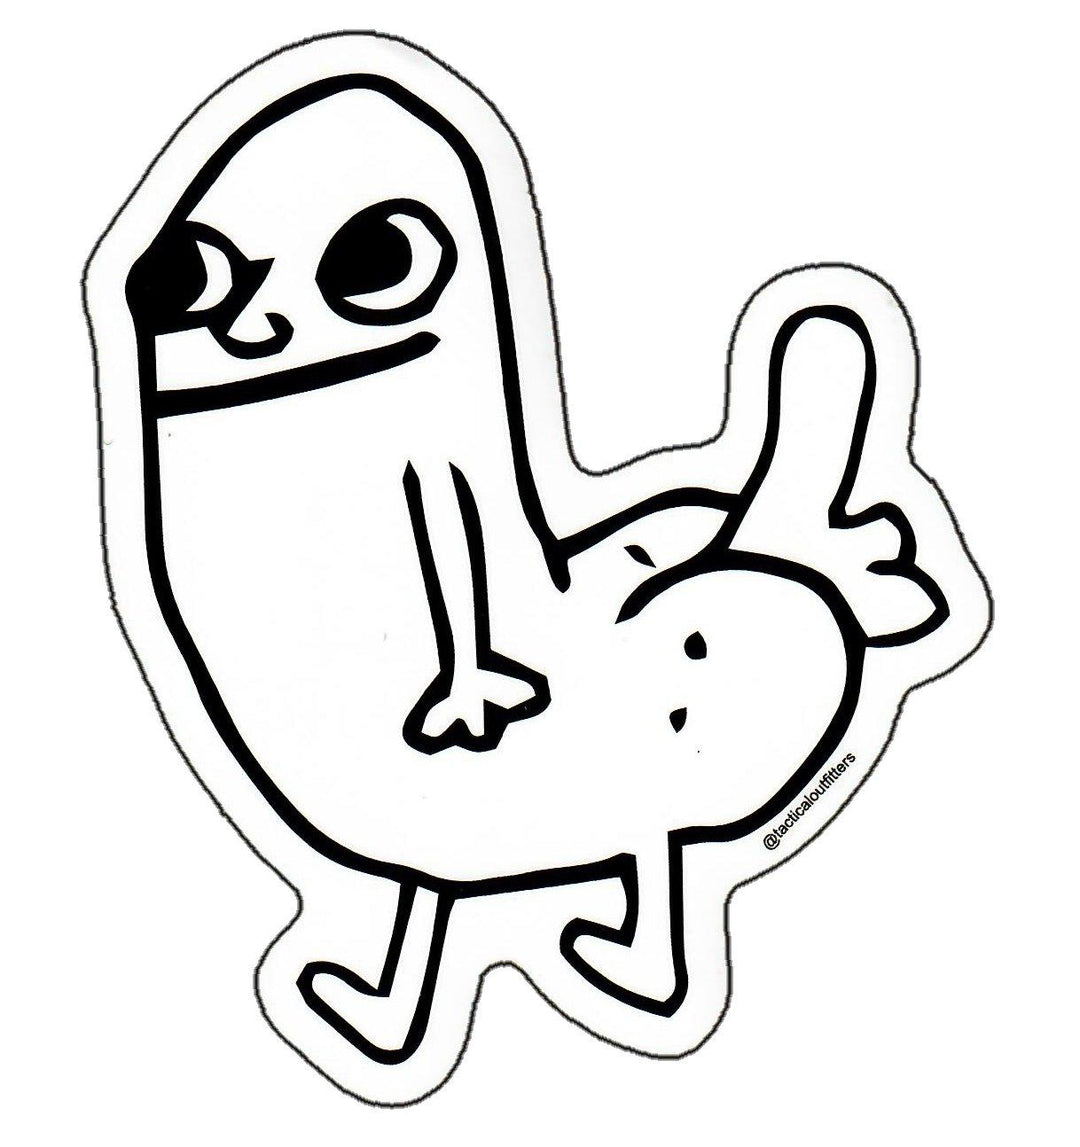 Supplies - Identification - Stickers - Tactical Outfitters Dickbutt Sticker